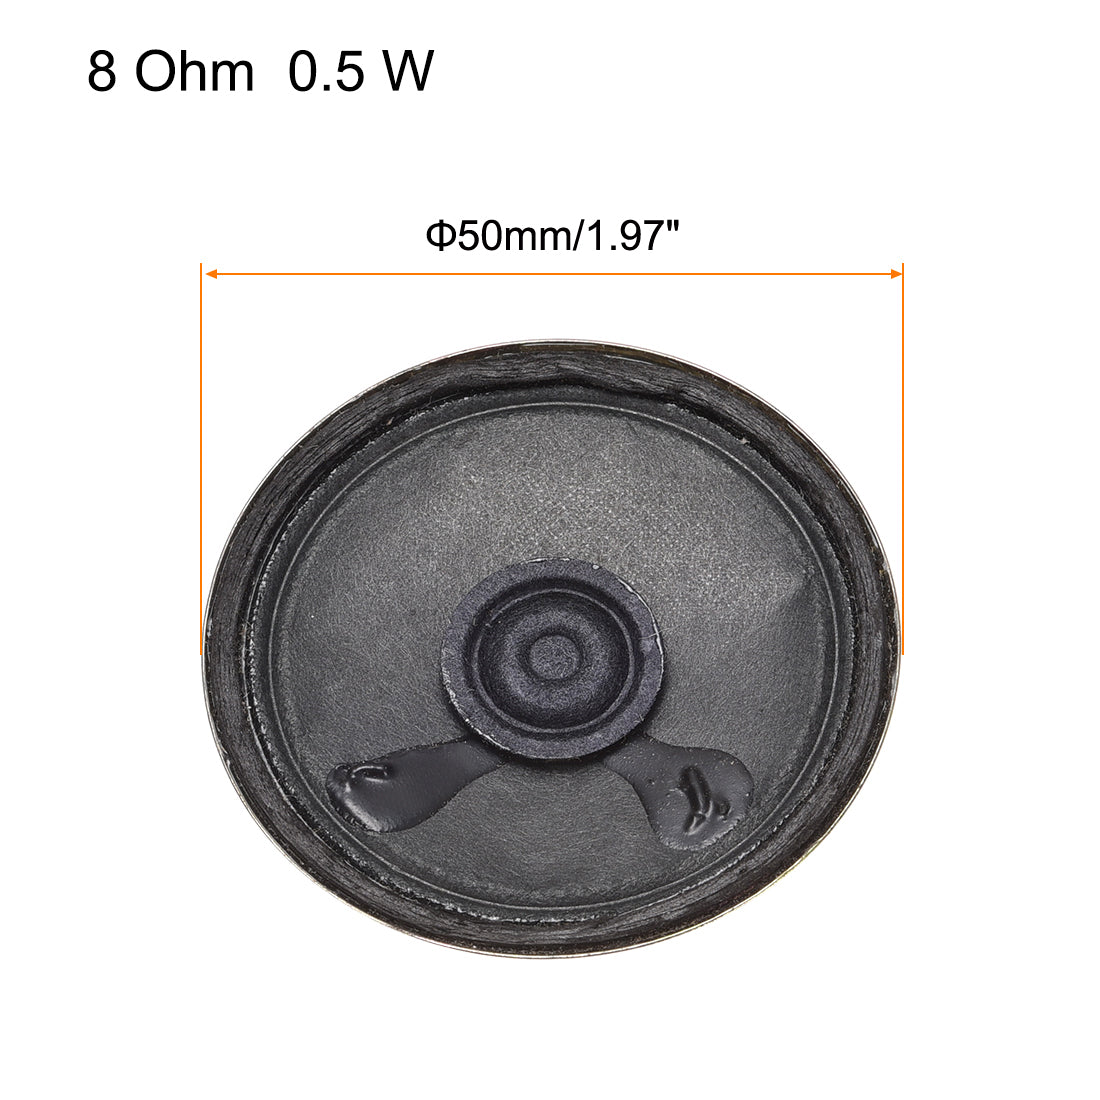 uxcell Uxcell 0.5W 8 Ohm DIY Magnetic Speaker 50mm Round Shape Replacement Loudspeaker 4pcs